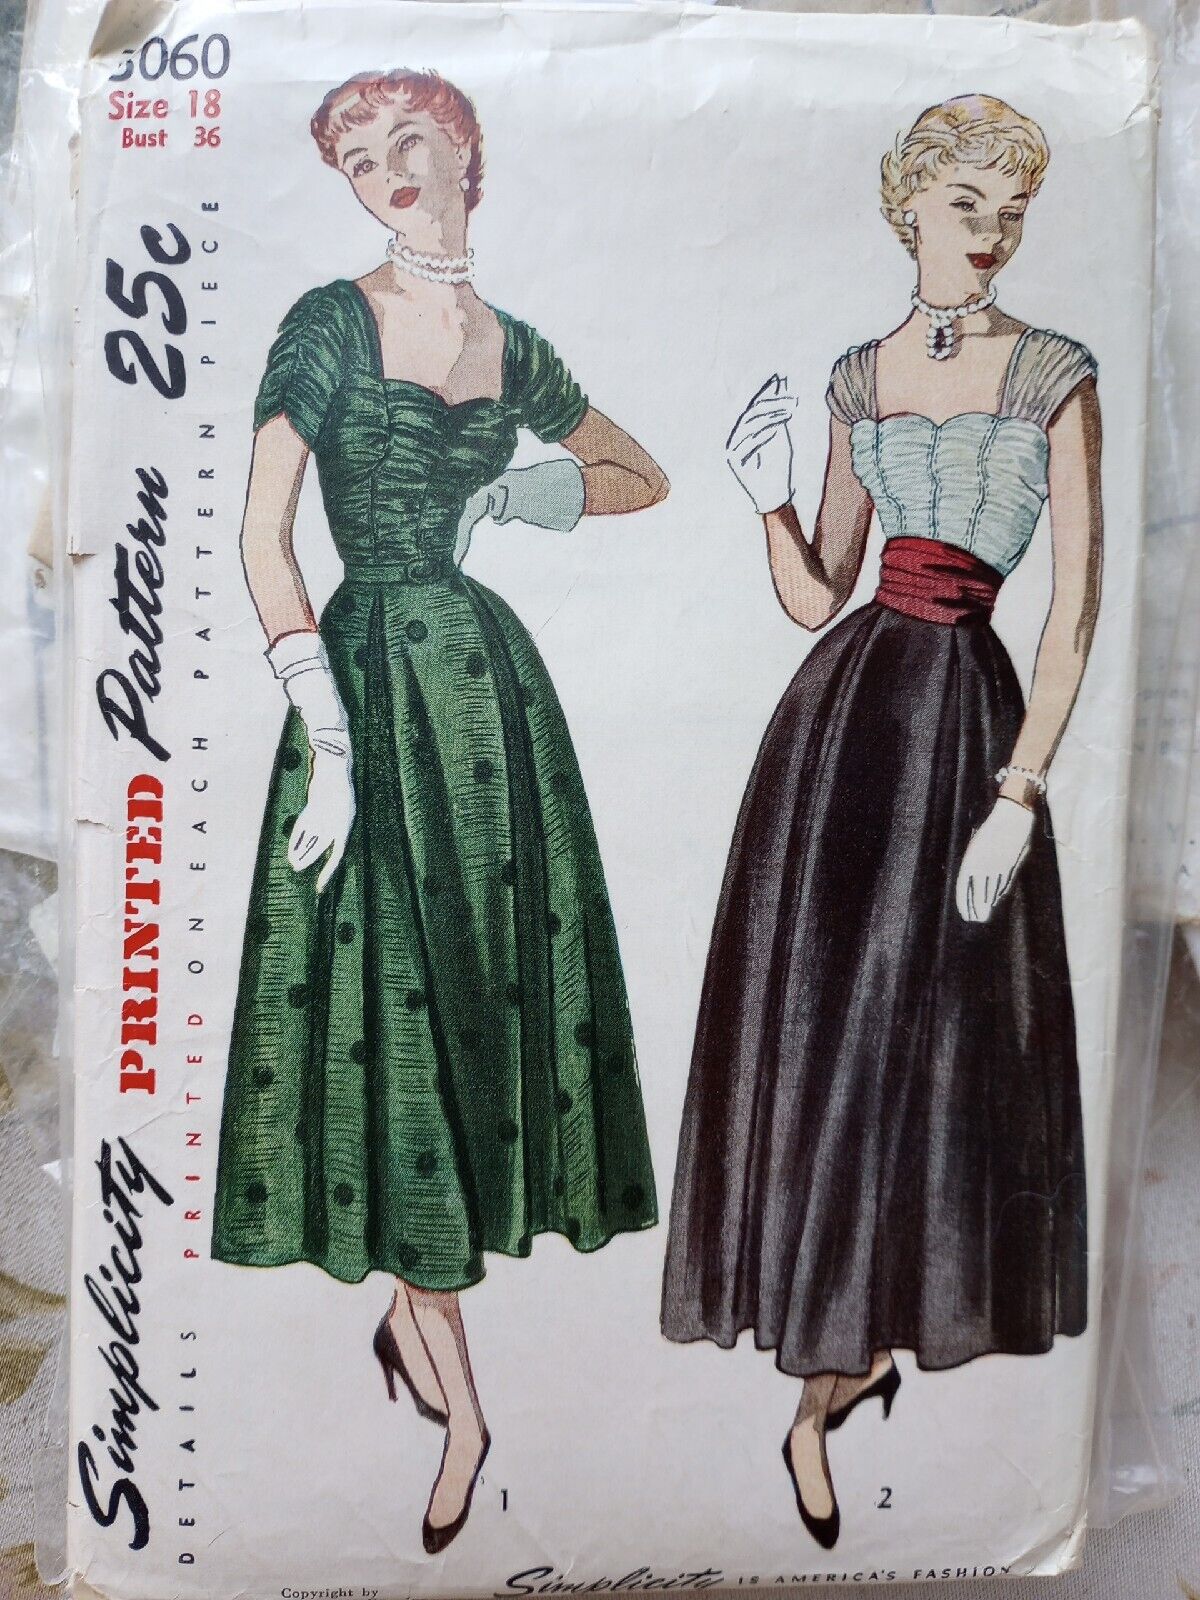 Vintage 1950s Pattern 3060 18 Bust 36 Shirred Sweetheart Swing Flare Evening VLV